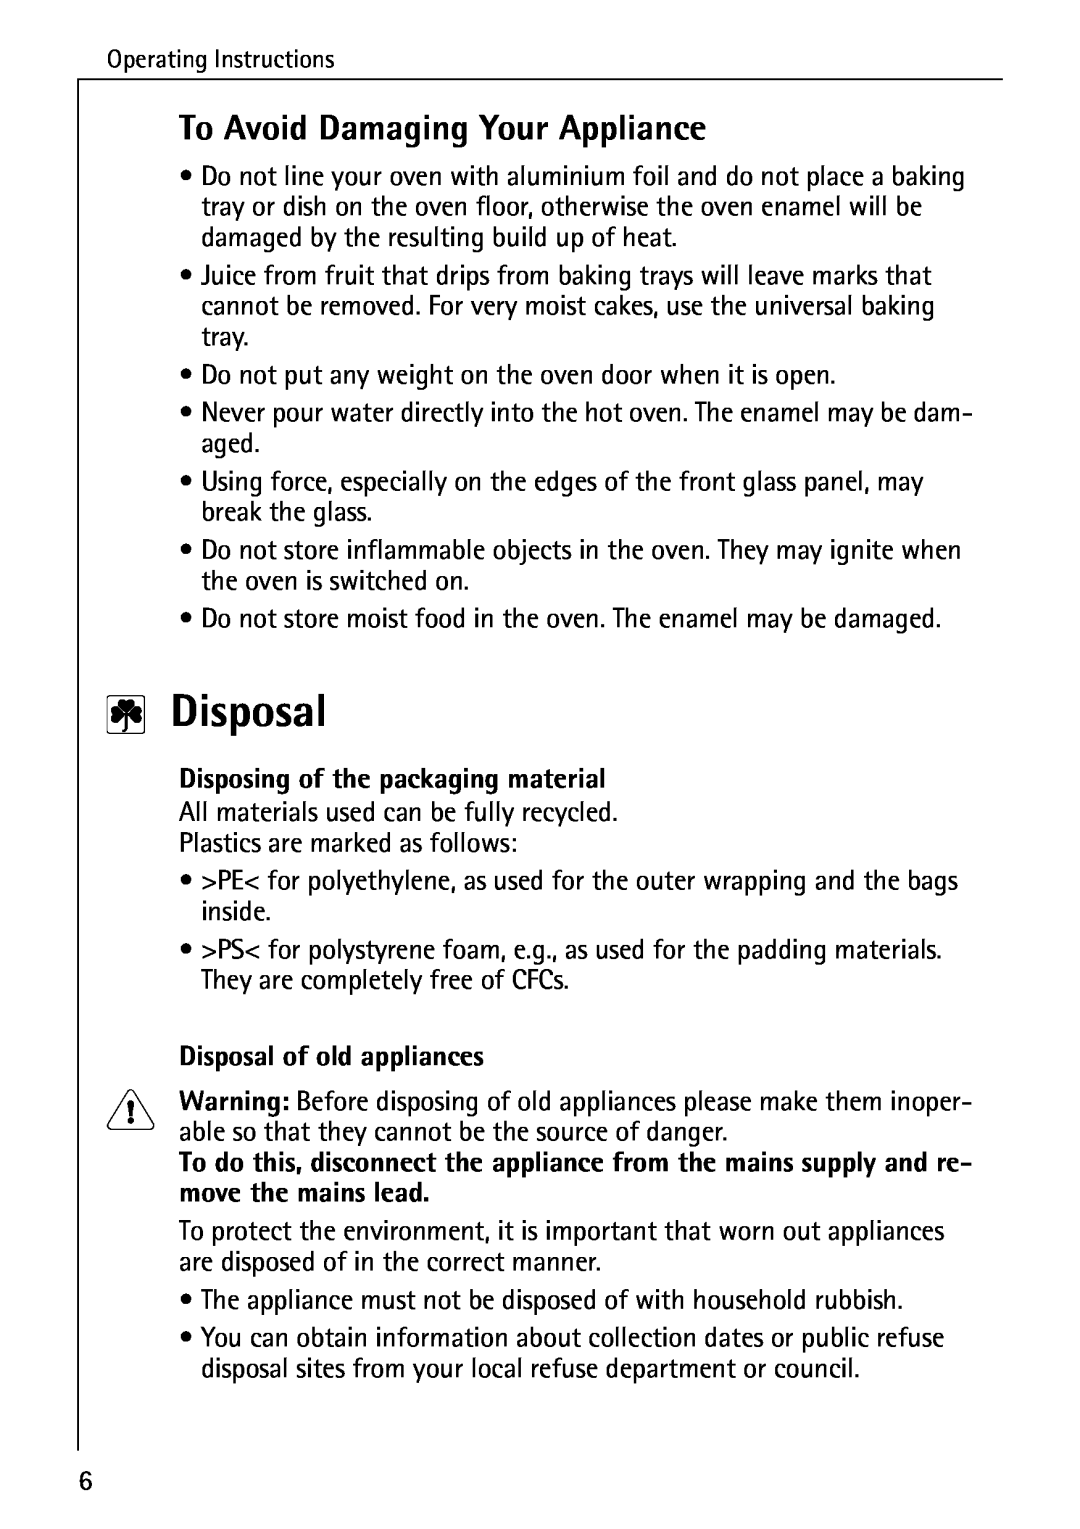 Electrolux B6140-1 manual Disposal, To Avoid Damaging Your Appliance, Disposing of the packaging material 